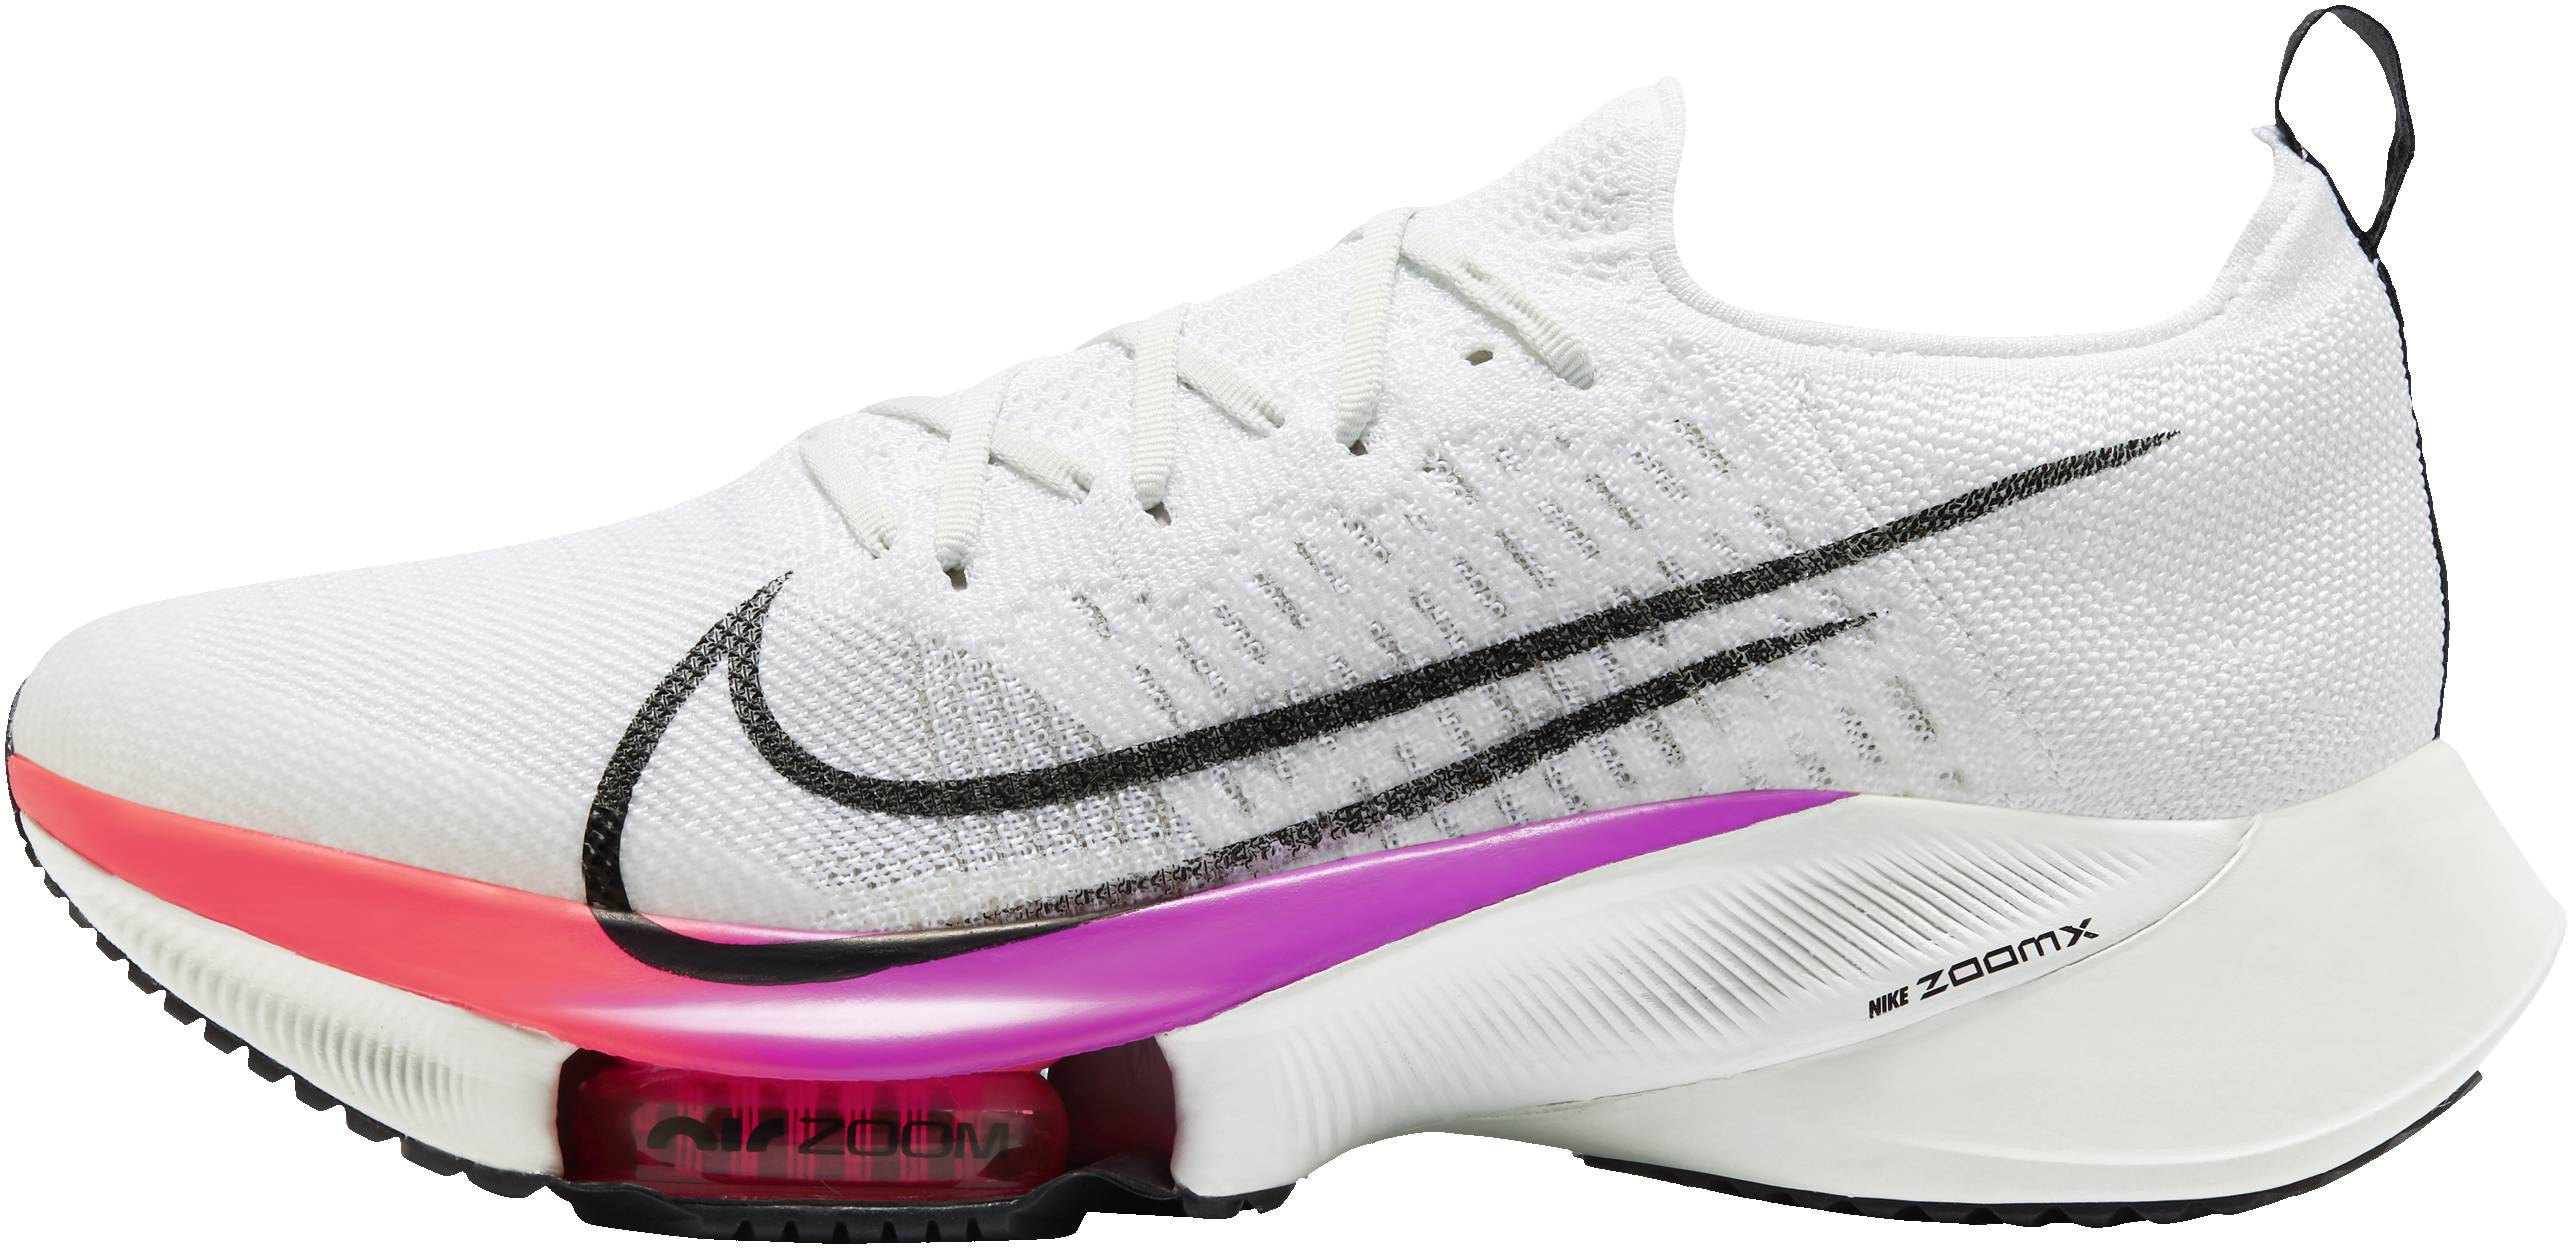 Save 19% on Nike ZoomX Running Shoes 